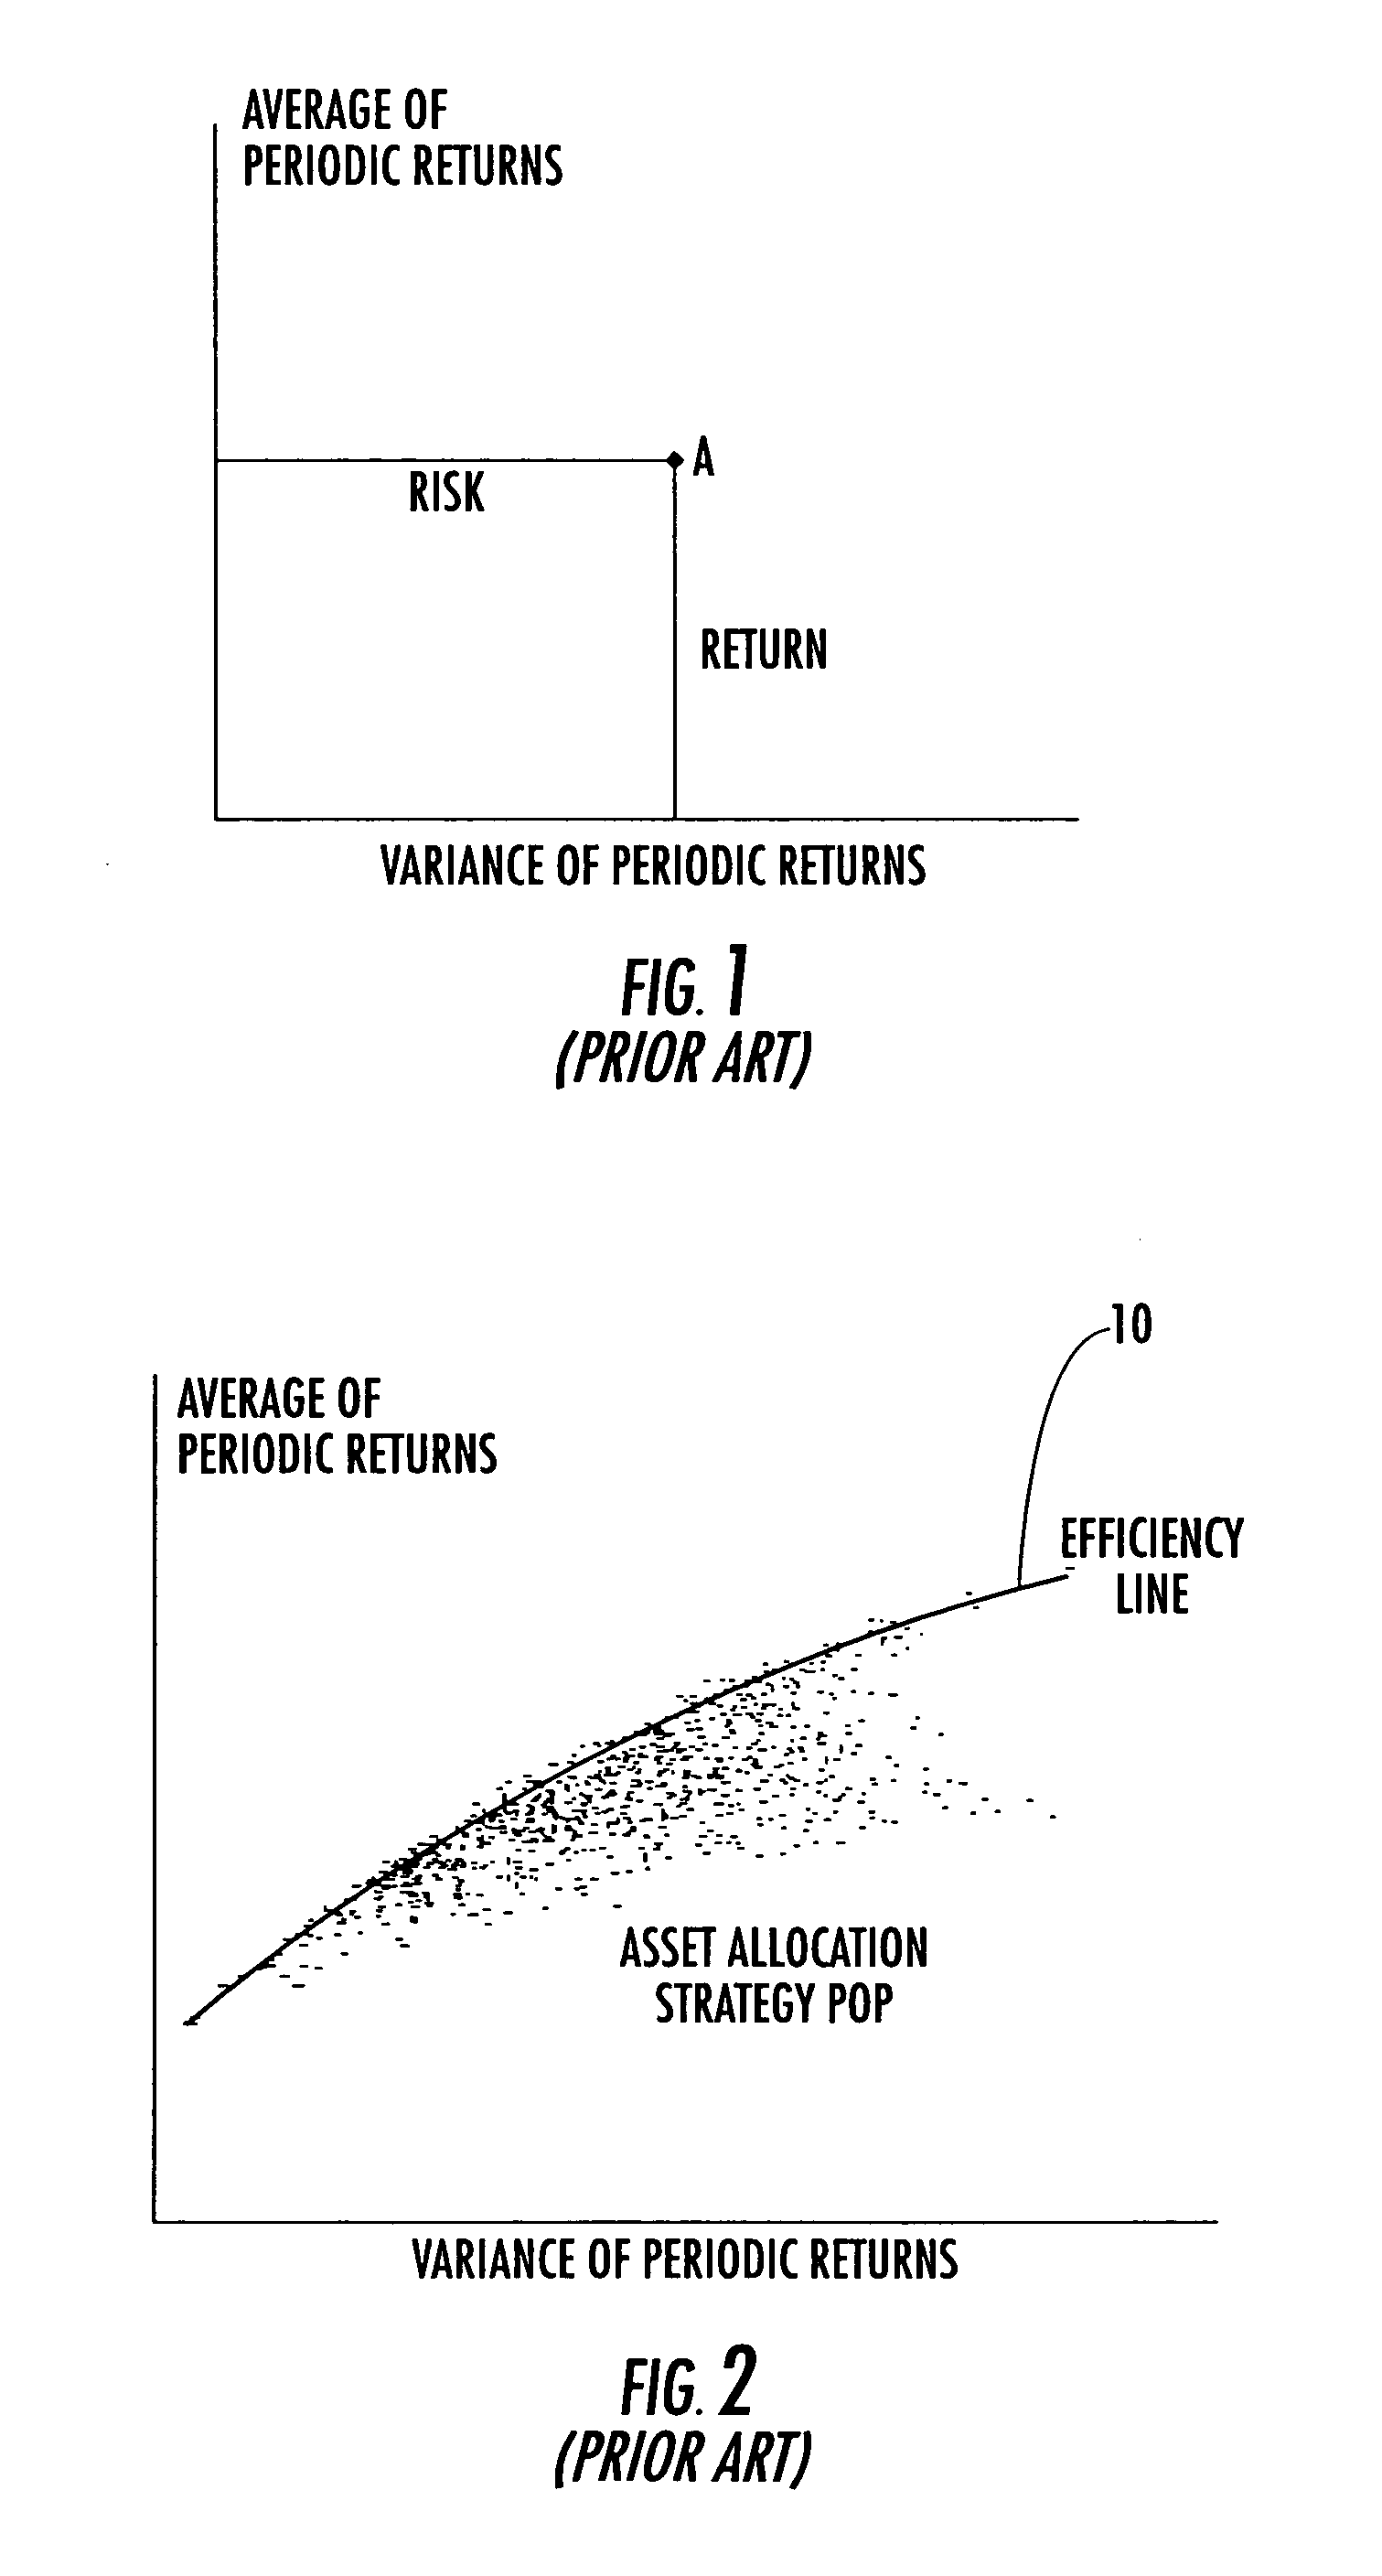 Method for evaluating relative investment performance from internal benchmarks